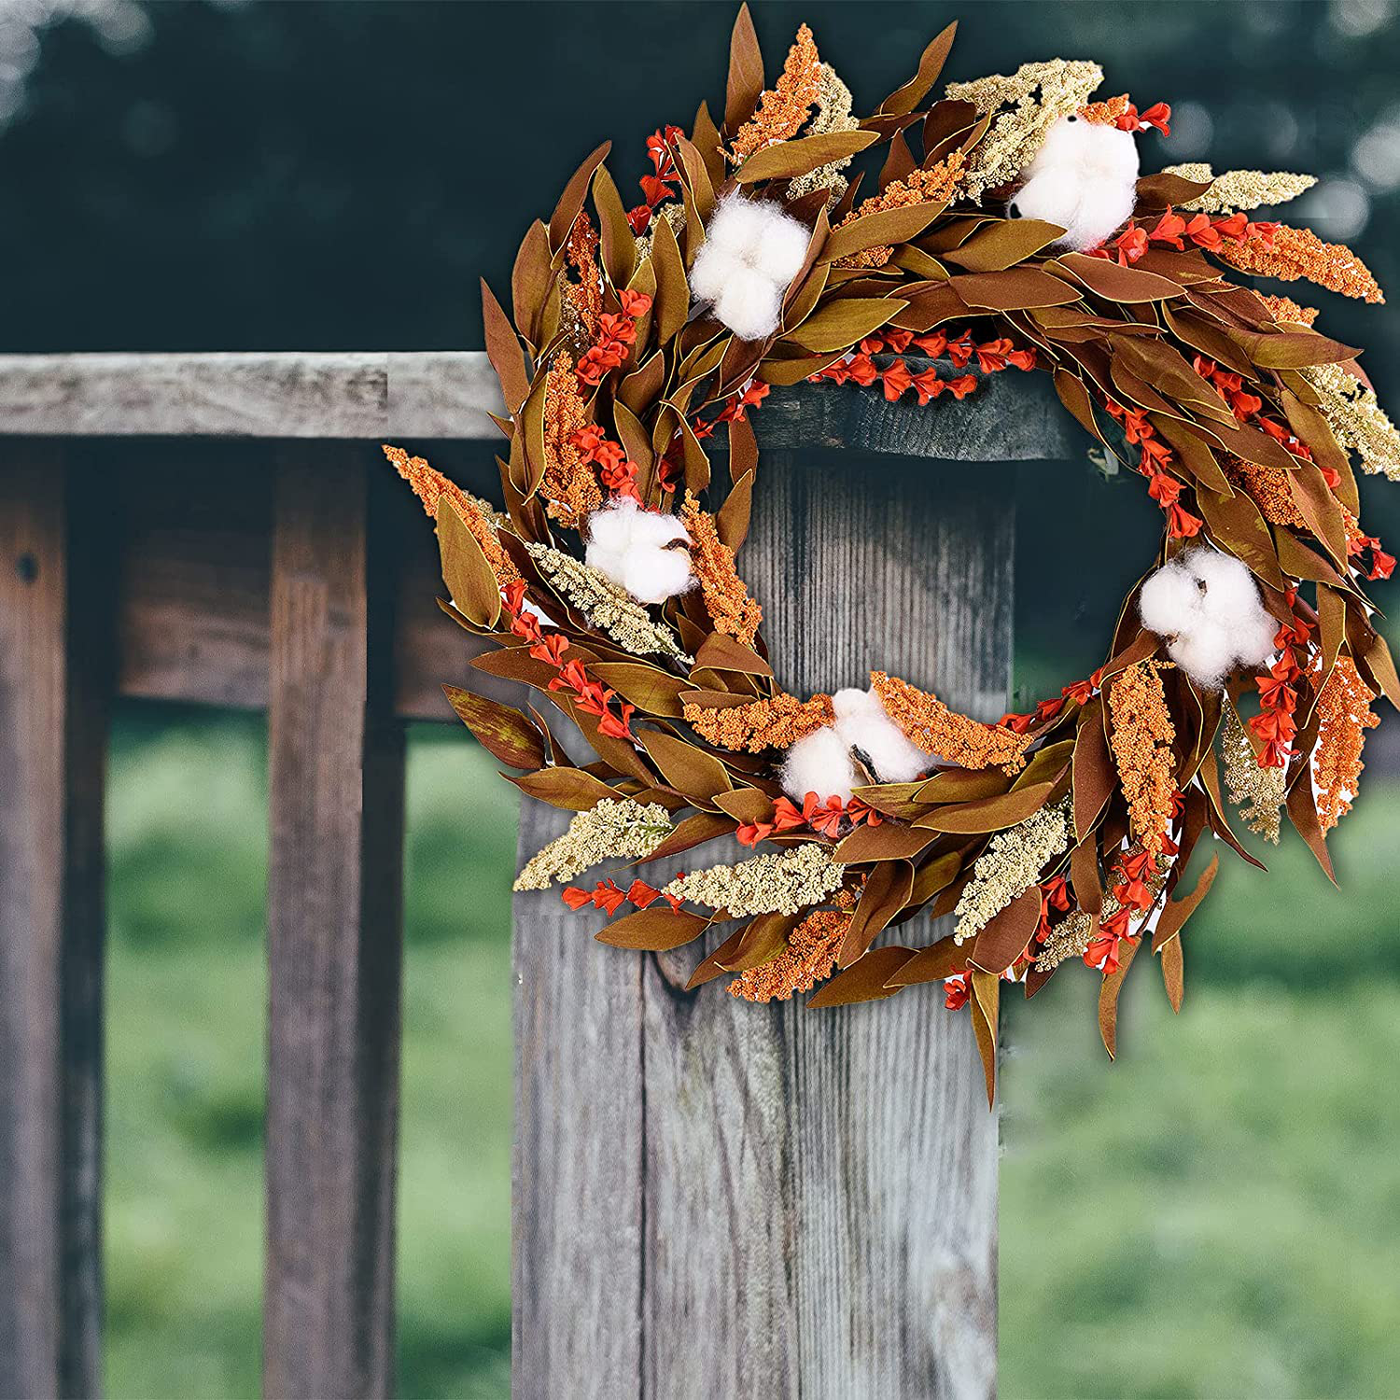 Foeyyir Autumn Wreath, 20 Inch, Colorful Maple Leaf Wreath for Front Door with Pumpkins, Pinecone and Berry, Halloween Decor, Harvest Fall Thanksgivings